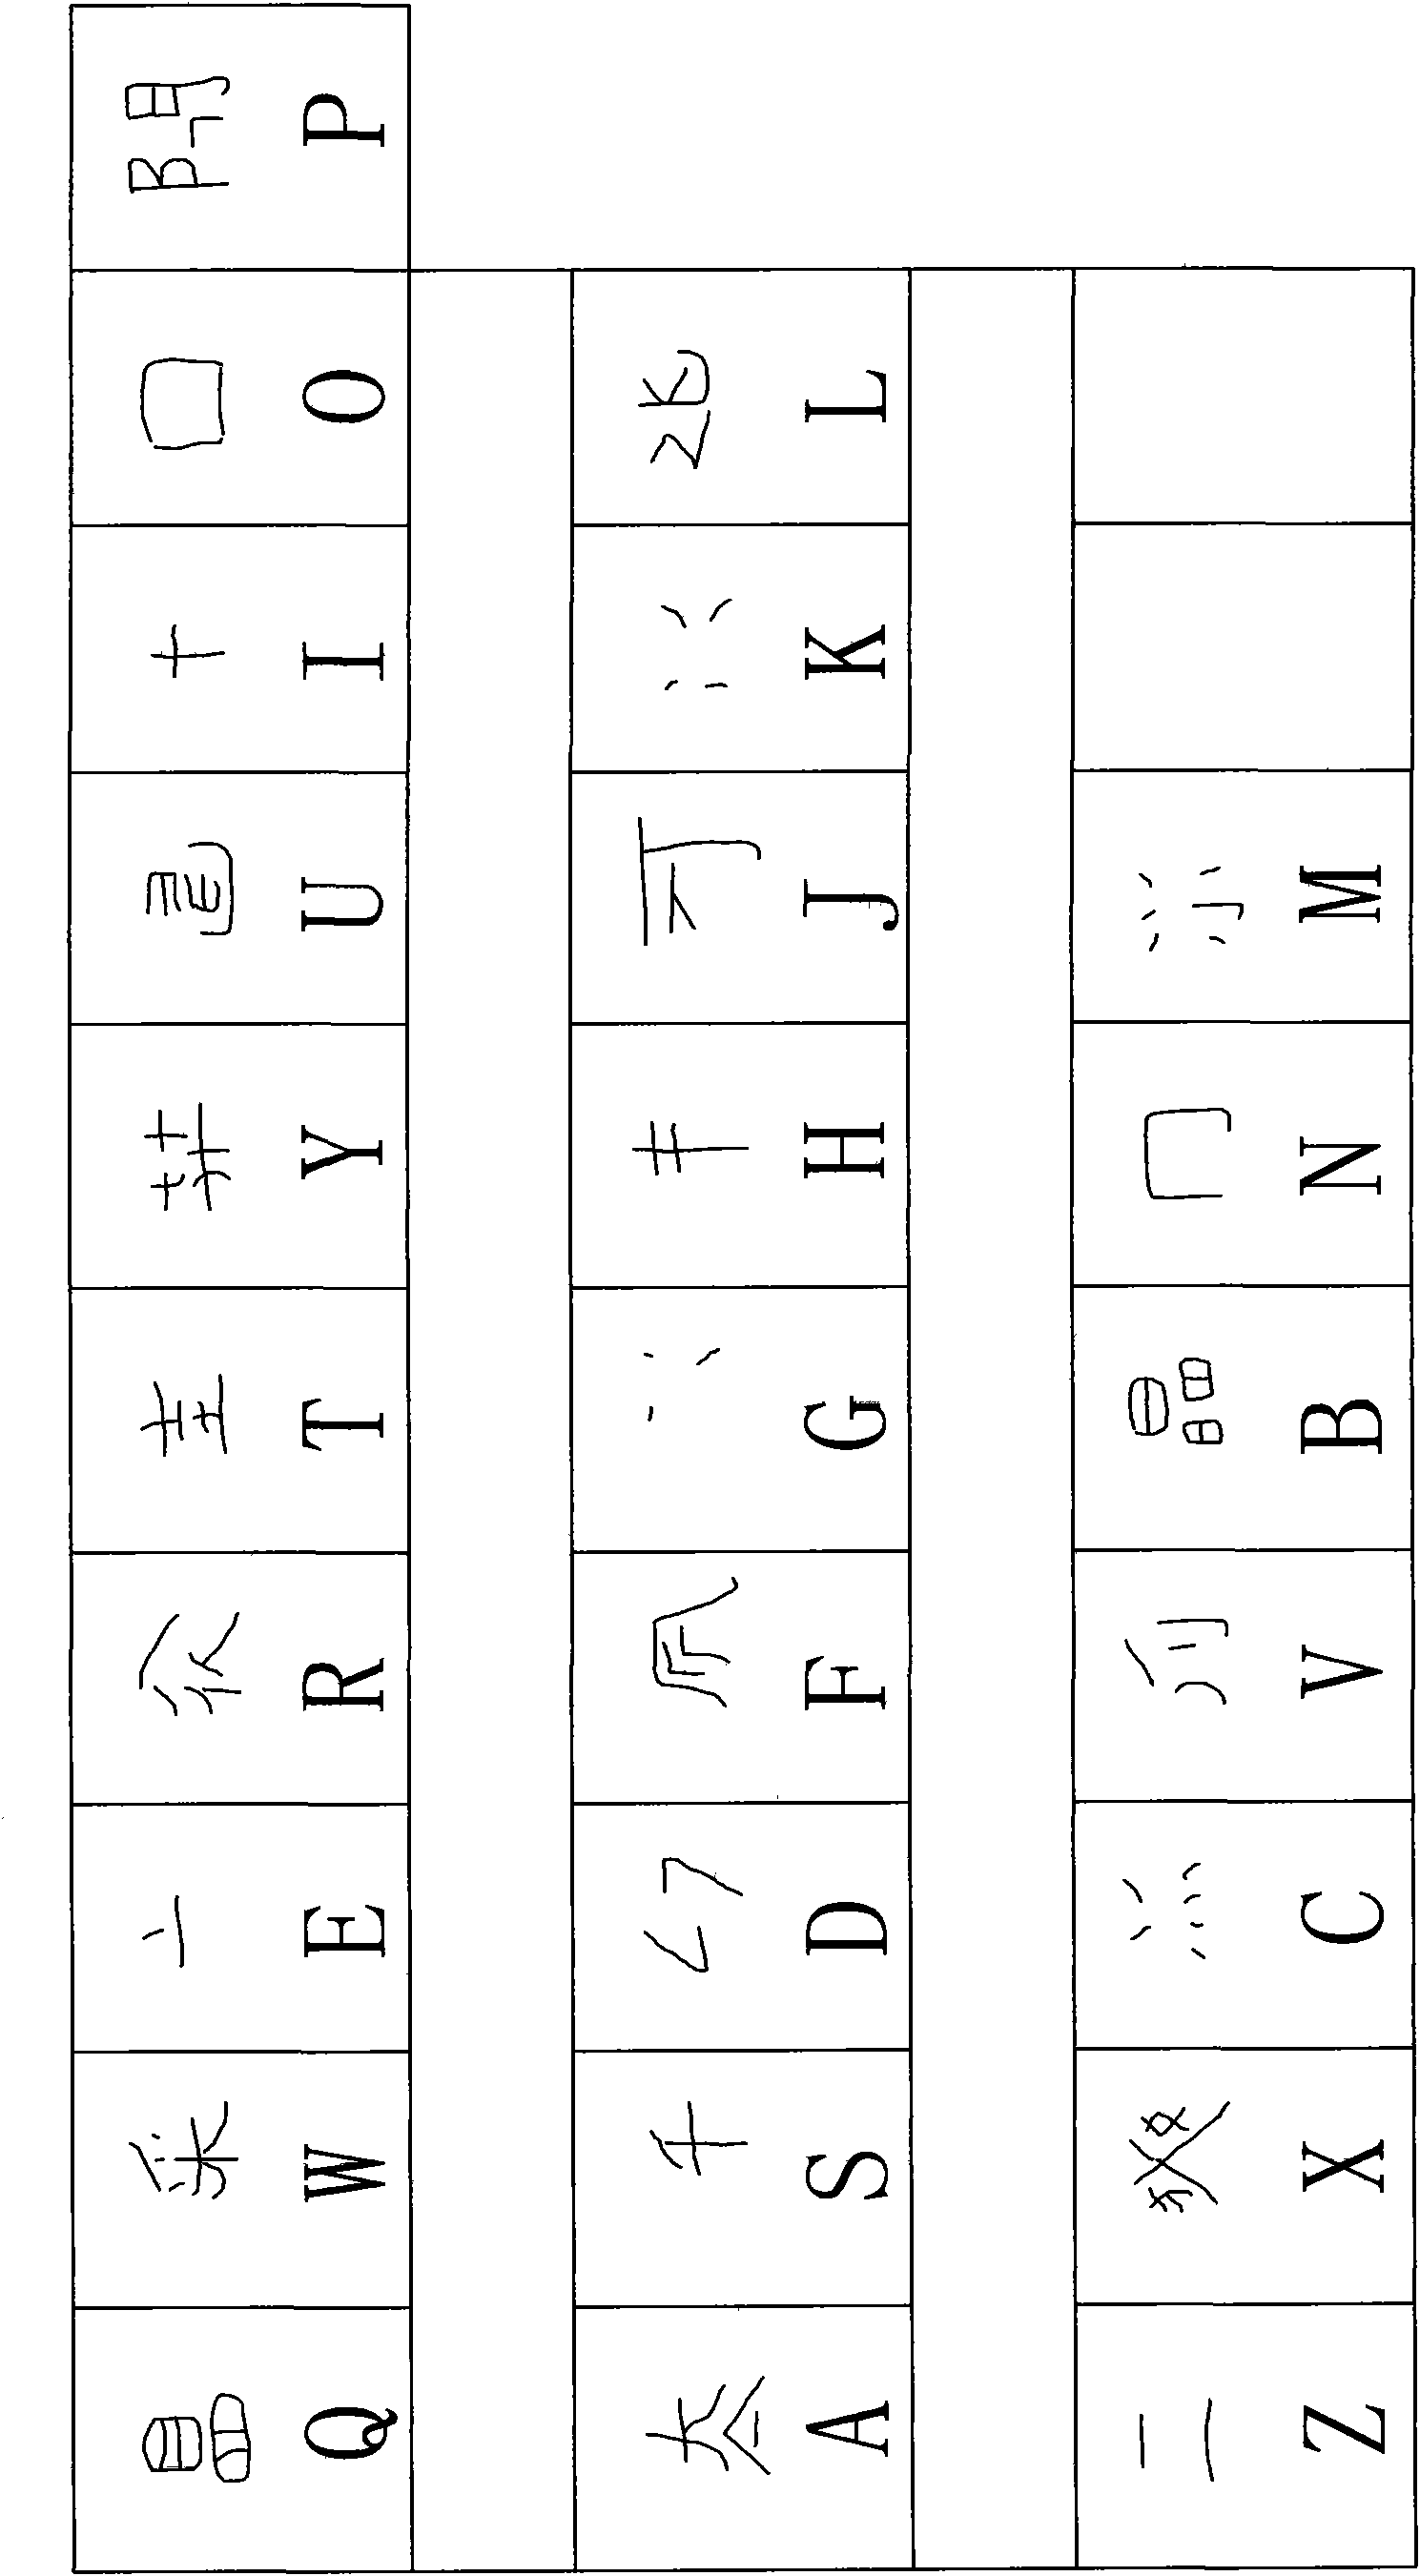 Universal Chinese character input method for traditional and simplified Chinese characters by scanning sides and corners